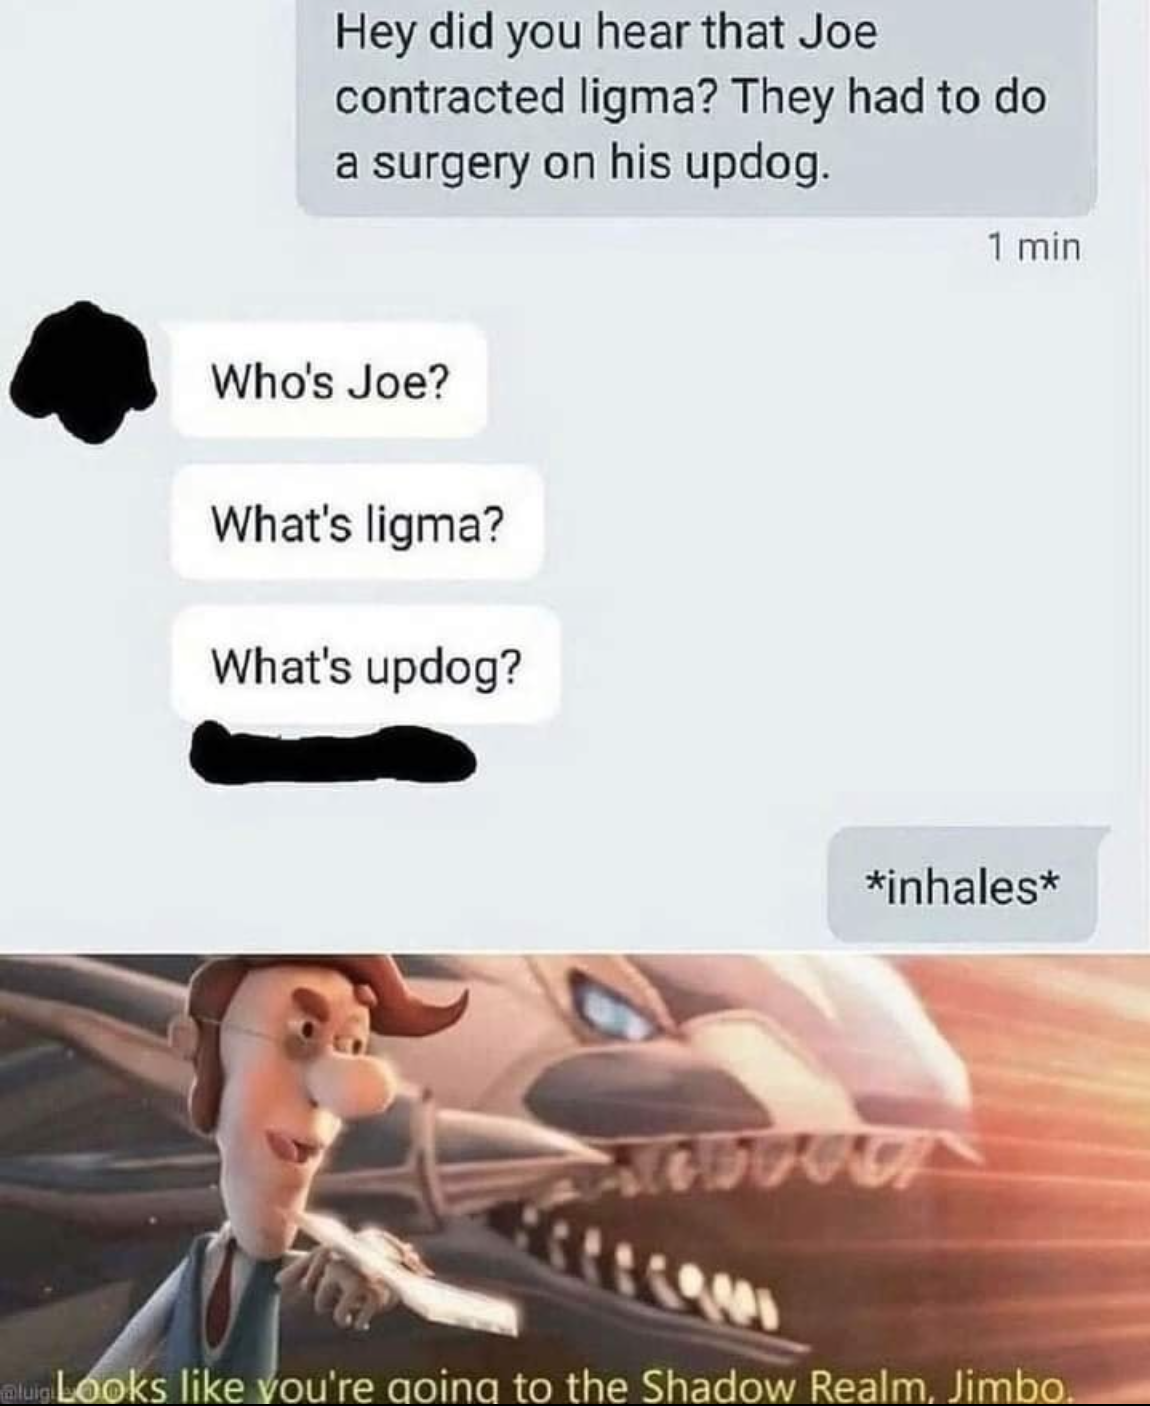 funny gaming memes - banished to the shadow realm - Hey did you hear that Joe contracted ligma? They had to do a surgery on his updog. 1 min Who's Joe? What's ligma? What's updog? inhales mus Looks you're going to the Shadow Realm, Jimbo